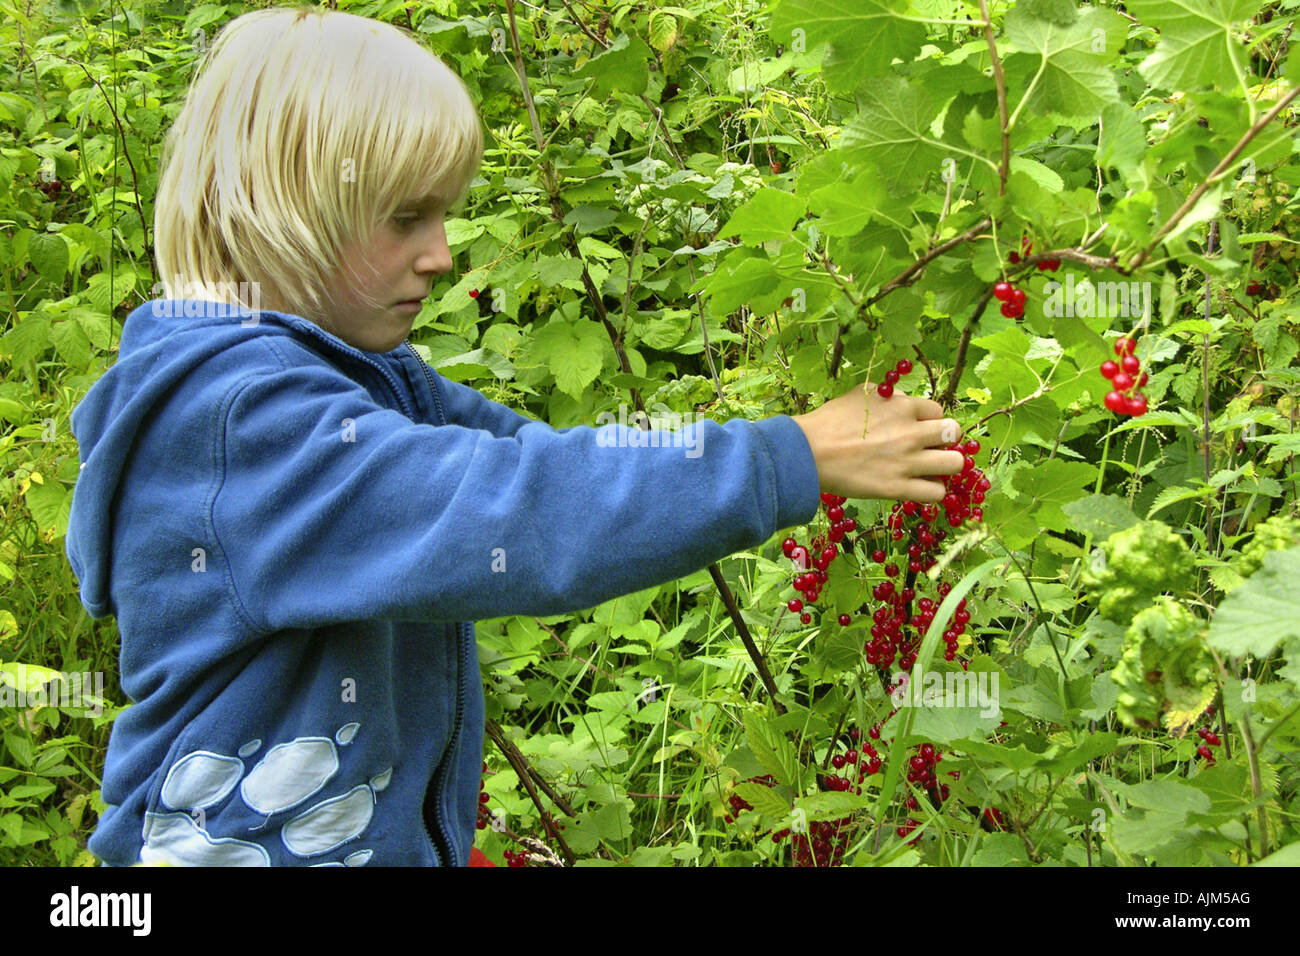 northern red currant (Ribes rubrum), boy harvesting mature fruits Stock Photo